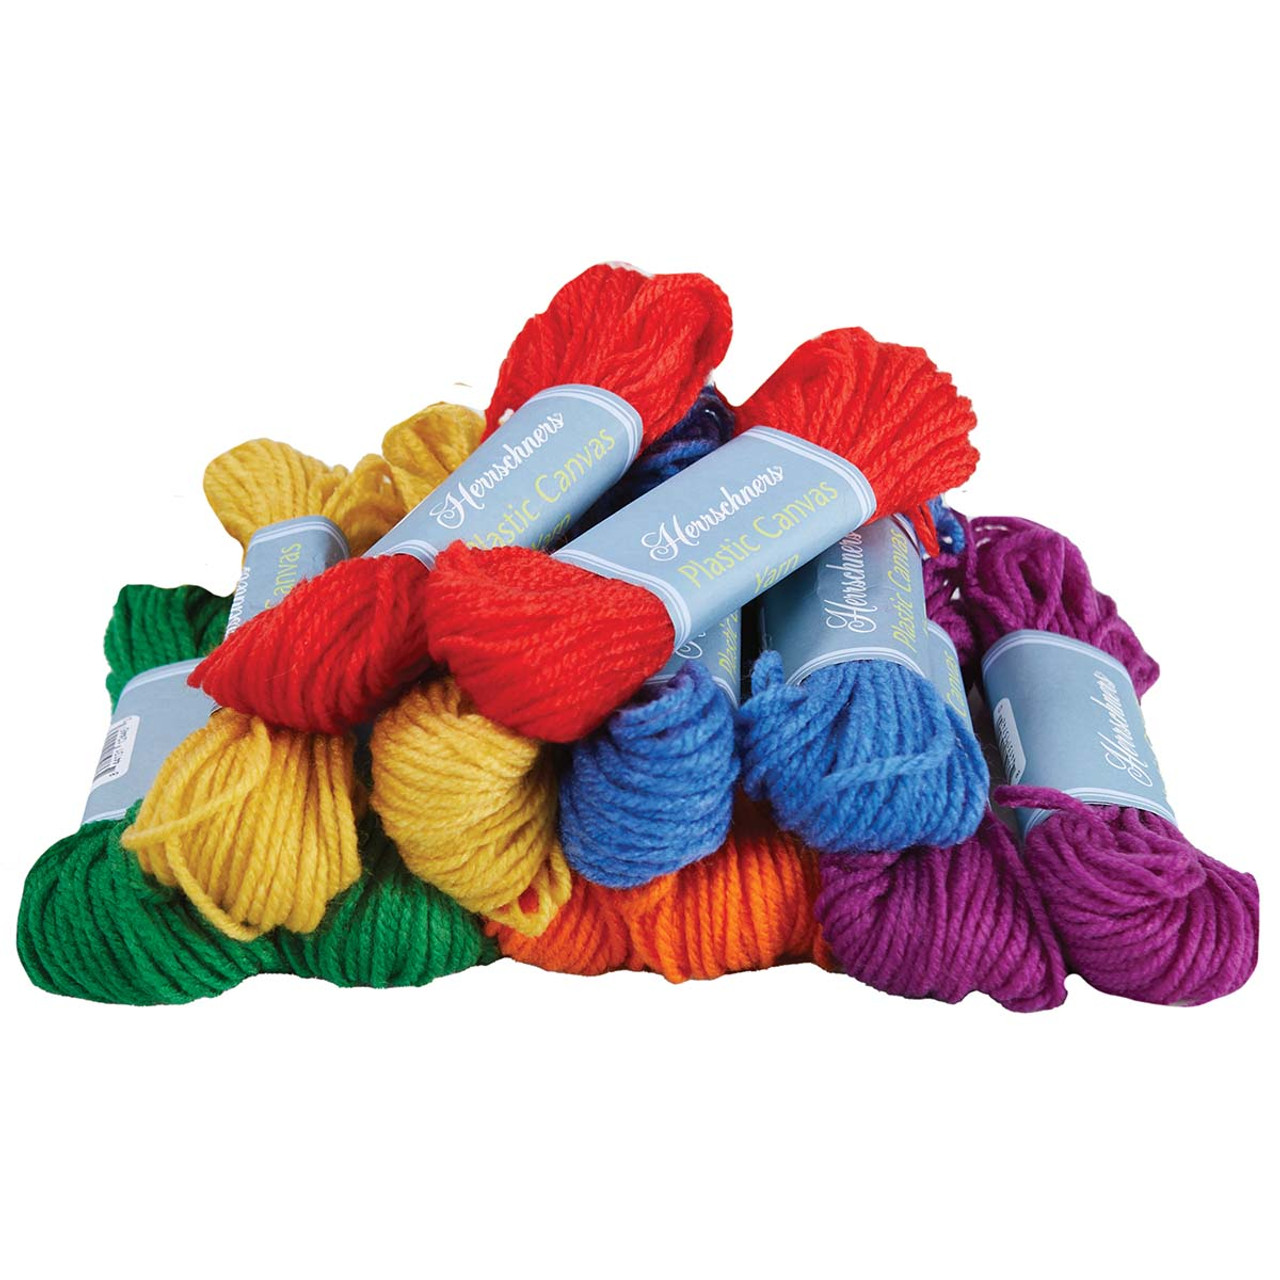 Herrschners Best Color-Coordinated Value Pack - Crochet Thread